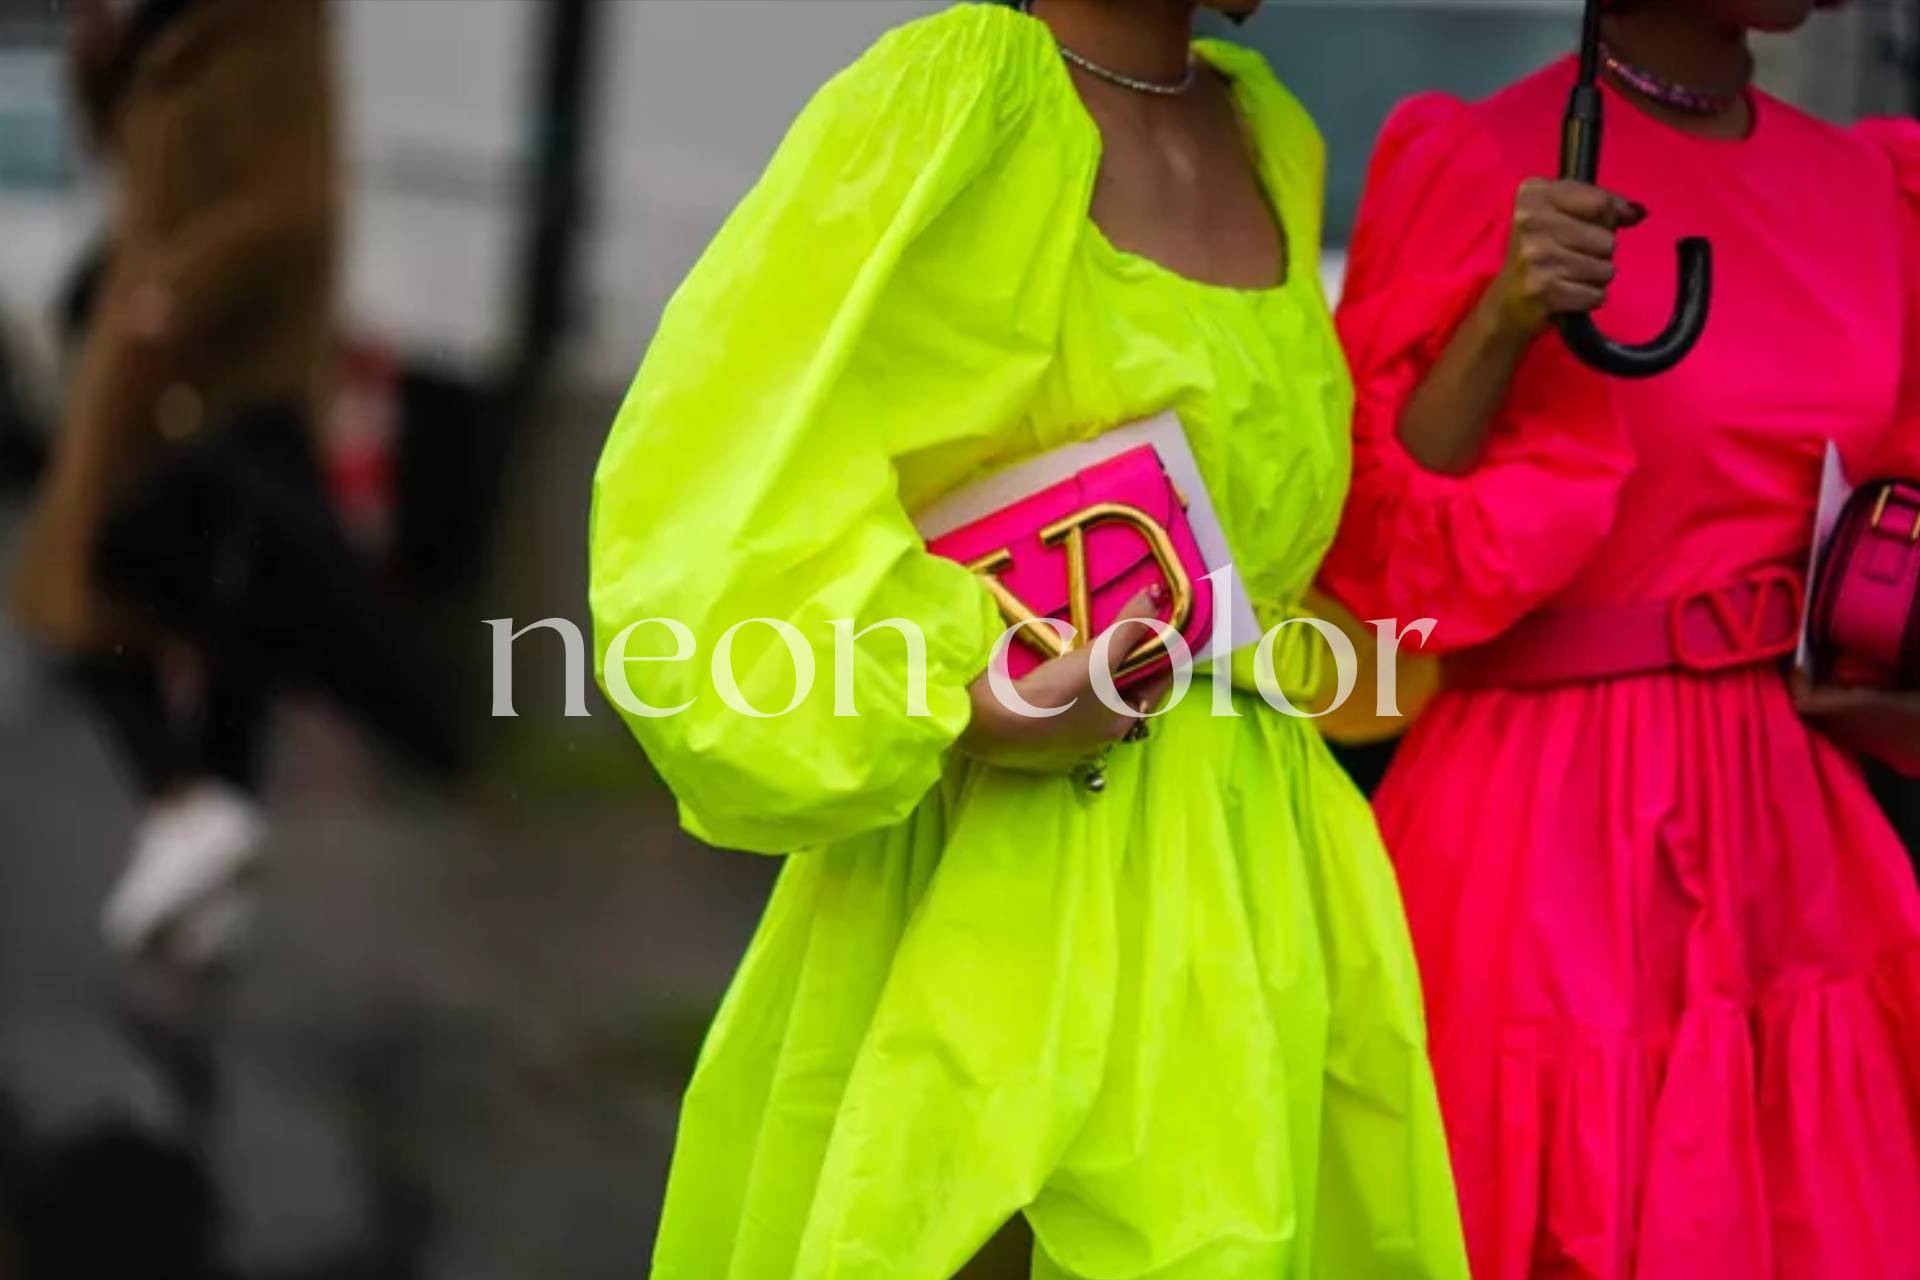 5 tips to incorporate neon colors into your daily outfits